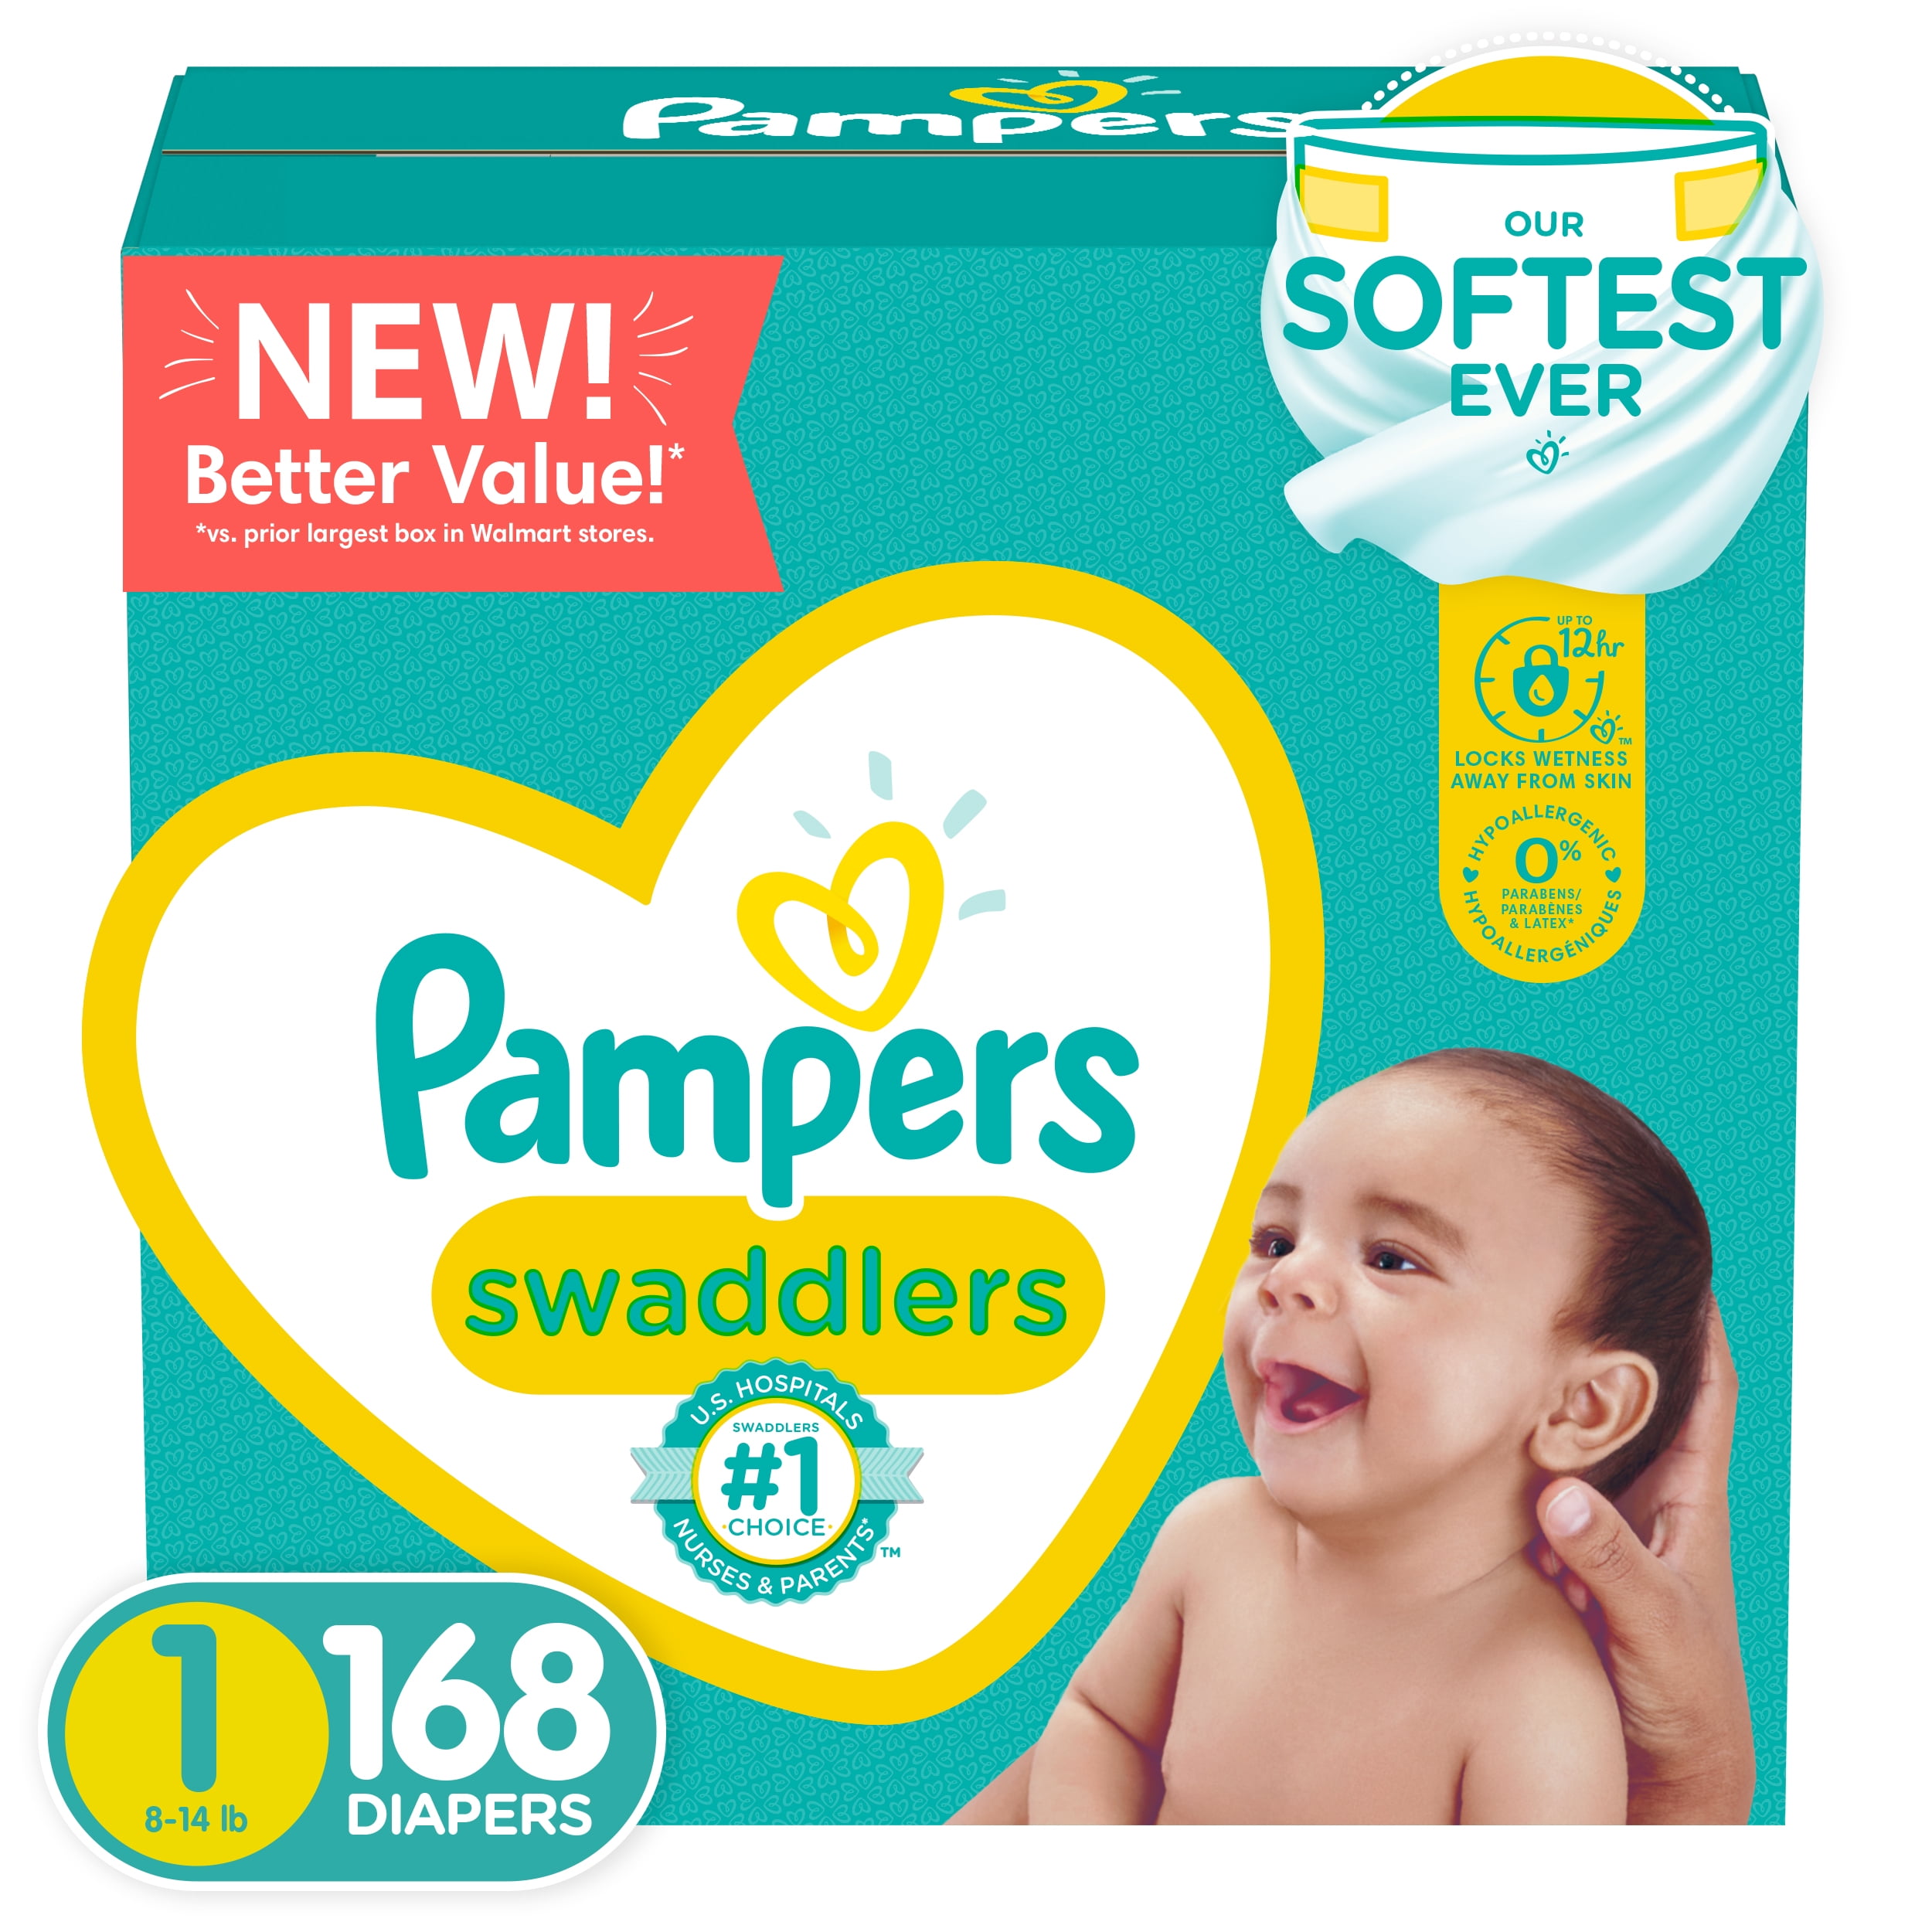 Pampers Swaddlers Diapers Sizes N,1,2,3,4,5,6